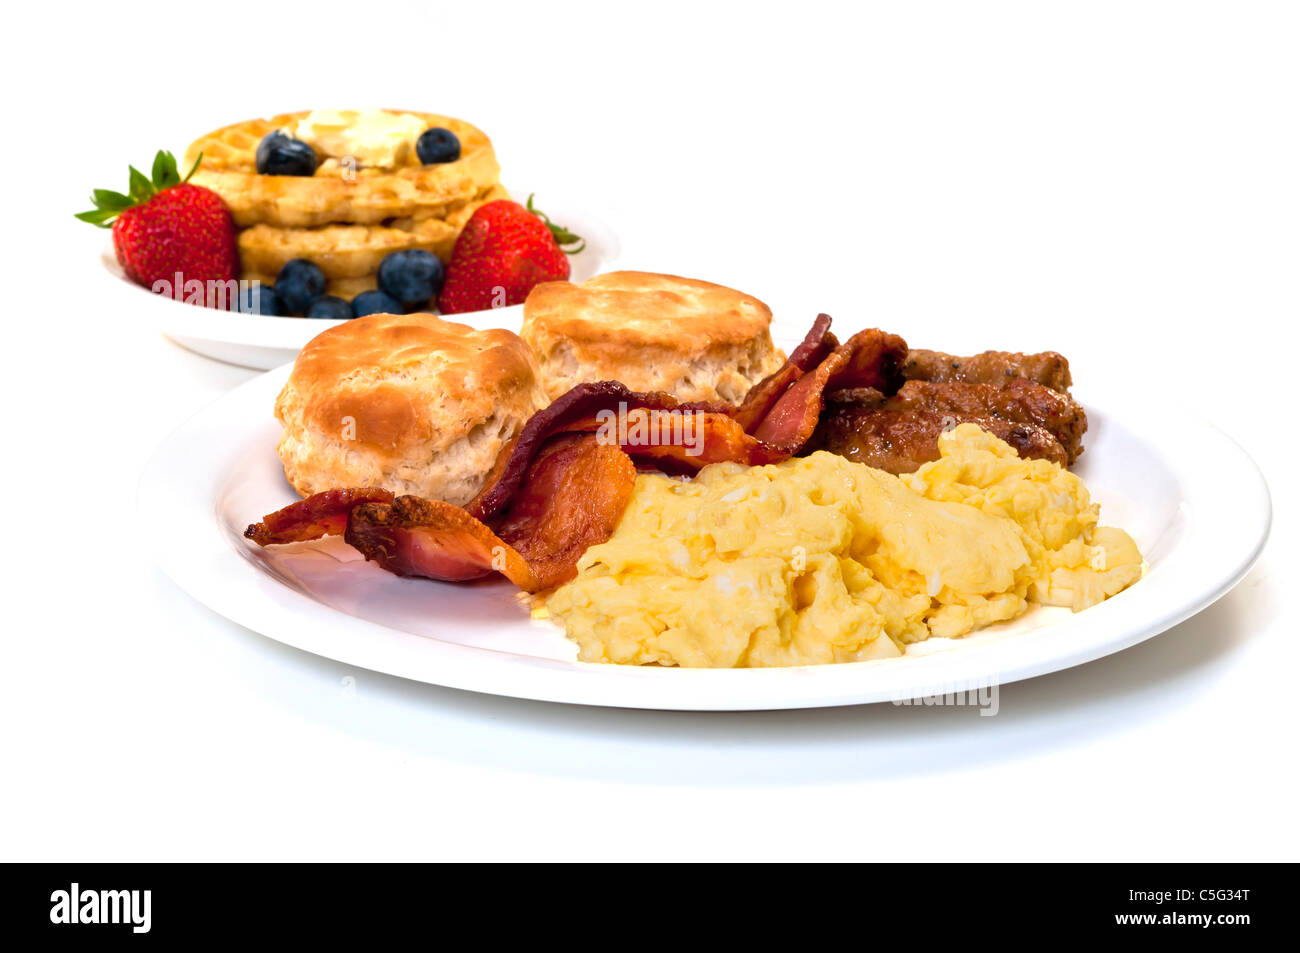 Scrambled eggs, bacon, link sausage, biscuits,  and waffles with strawberries and blueberries.  Isolated on white background. Stock Photo